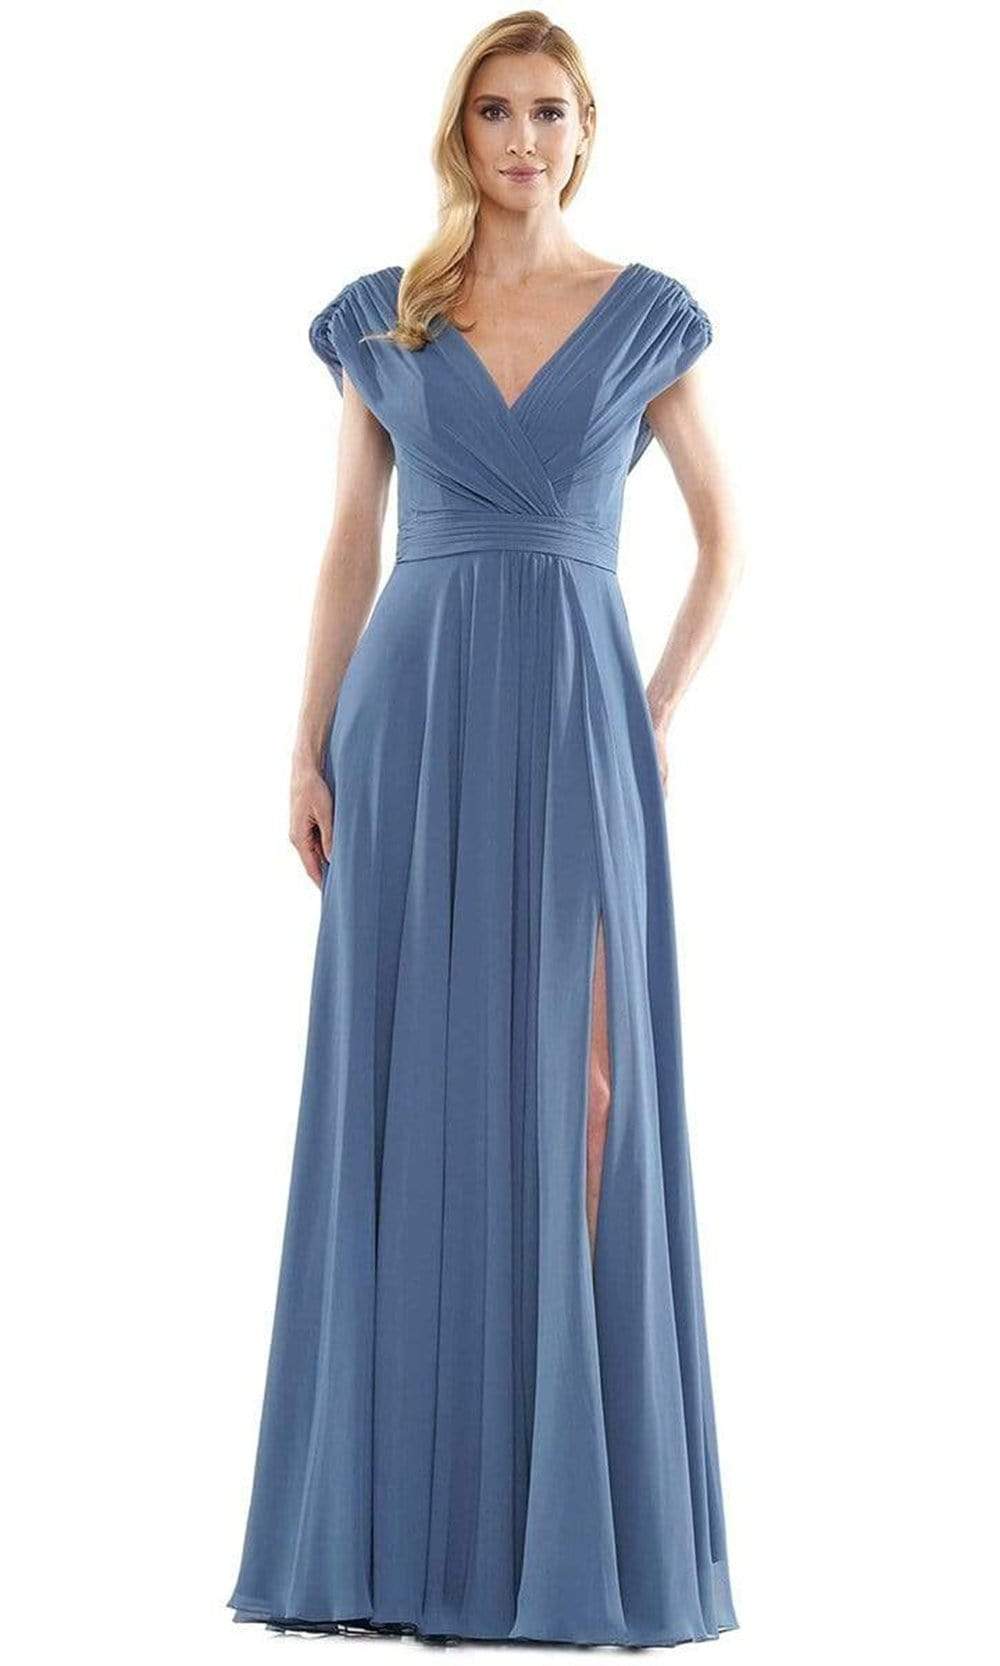 Marsoni By Colors - M251 Gathered V Neck Off Shoulder A-Line Gown Mother of the Bride Dresses 4 / Slate Blue